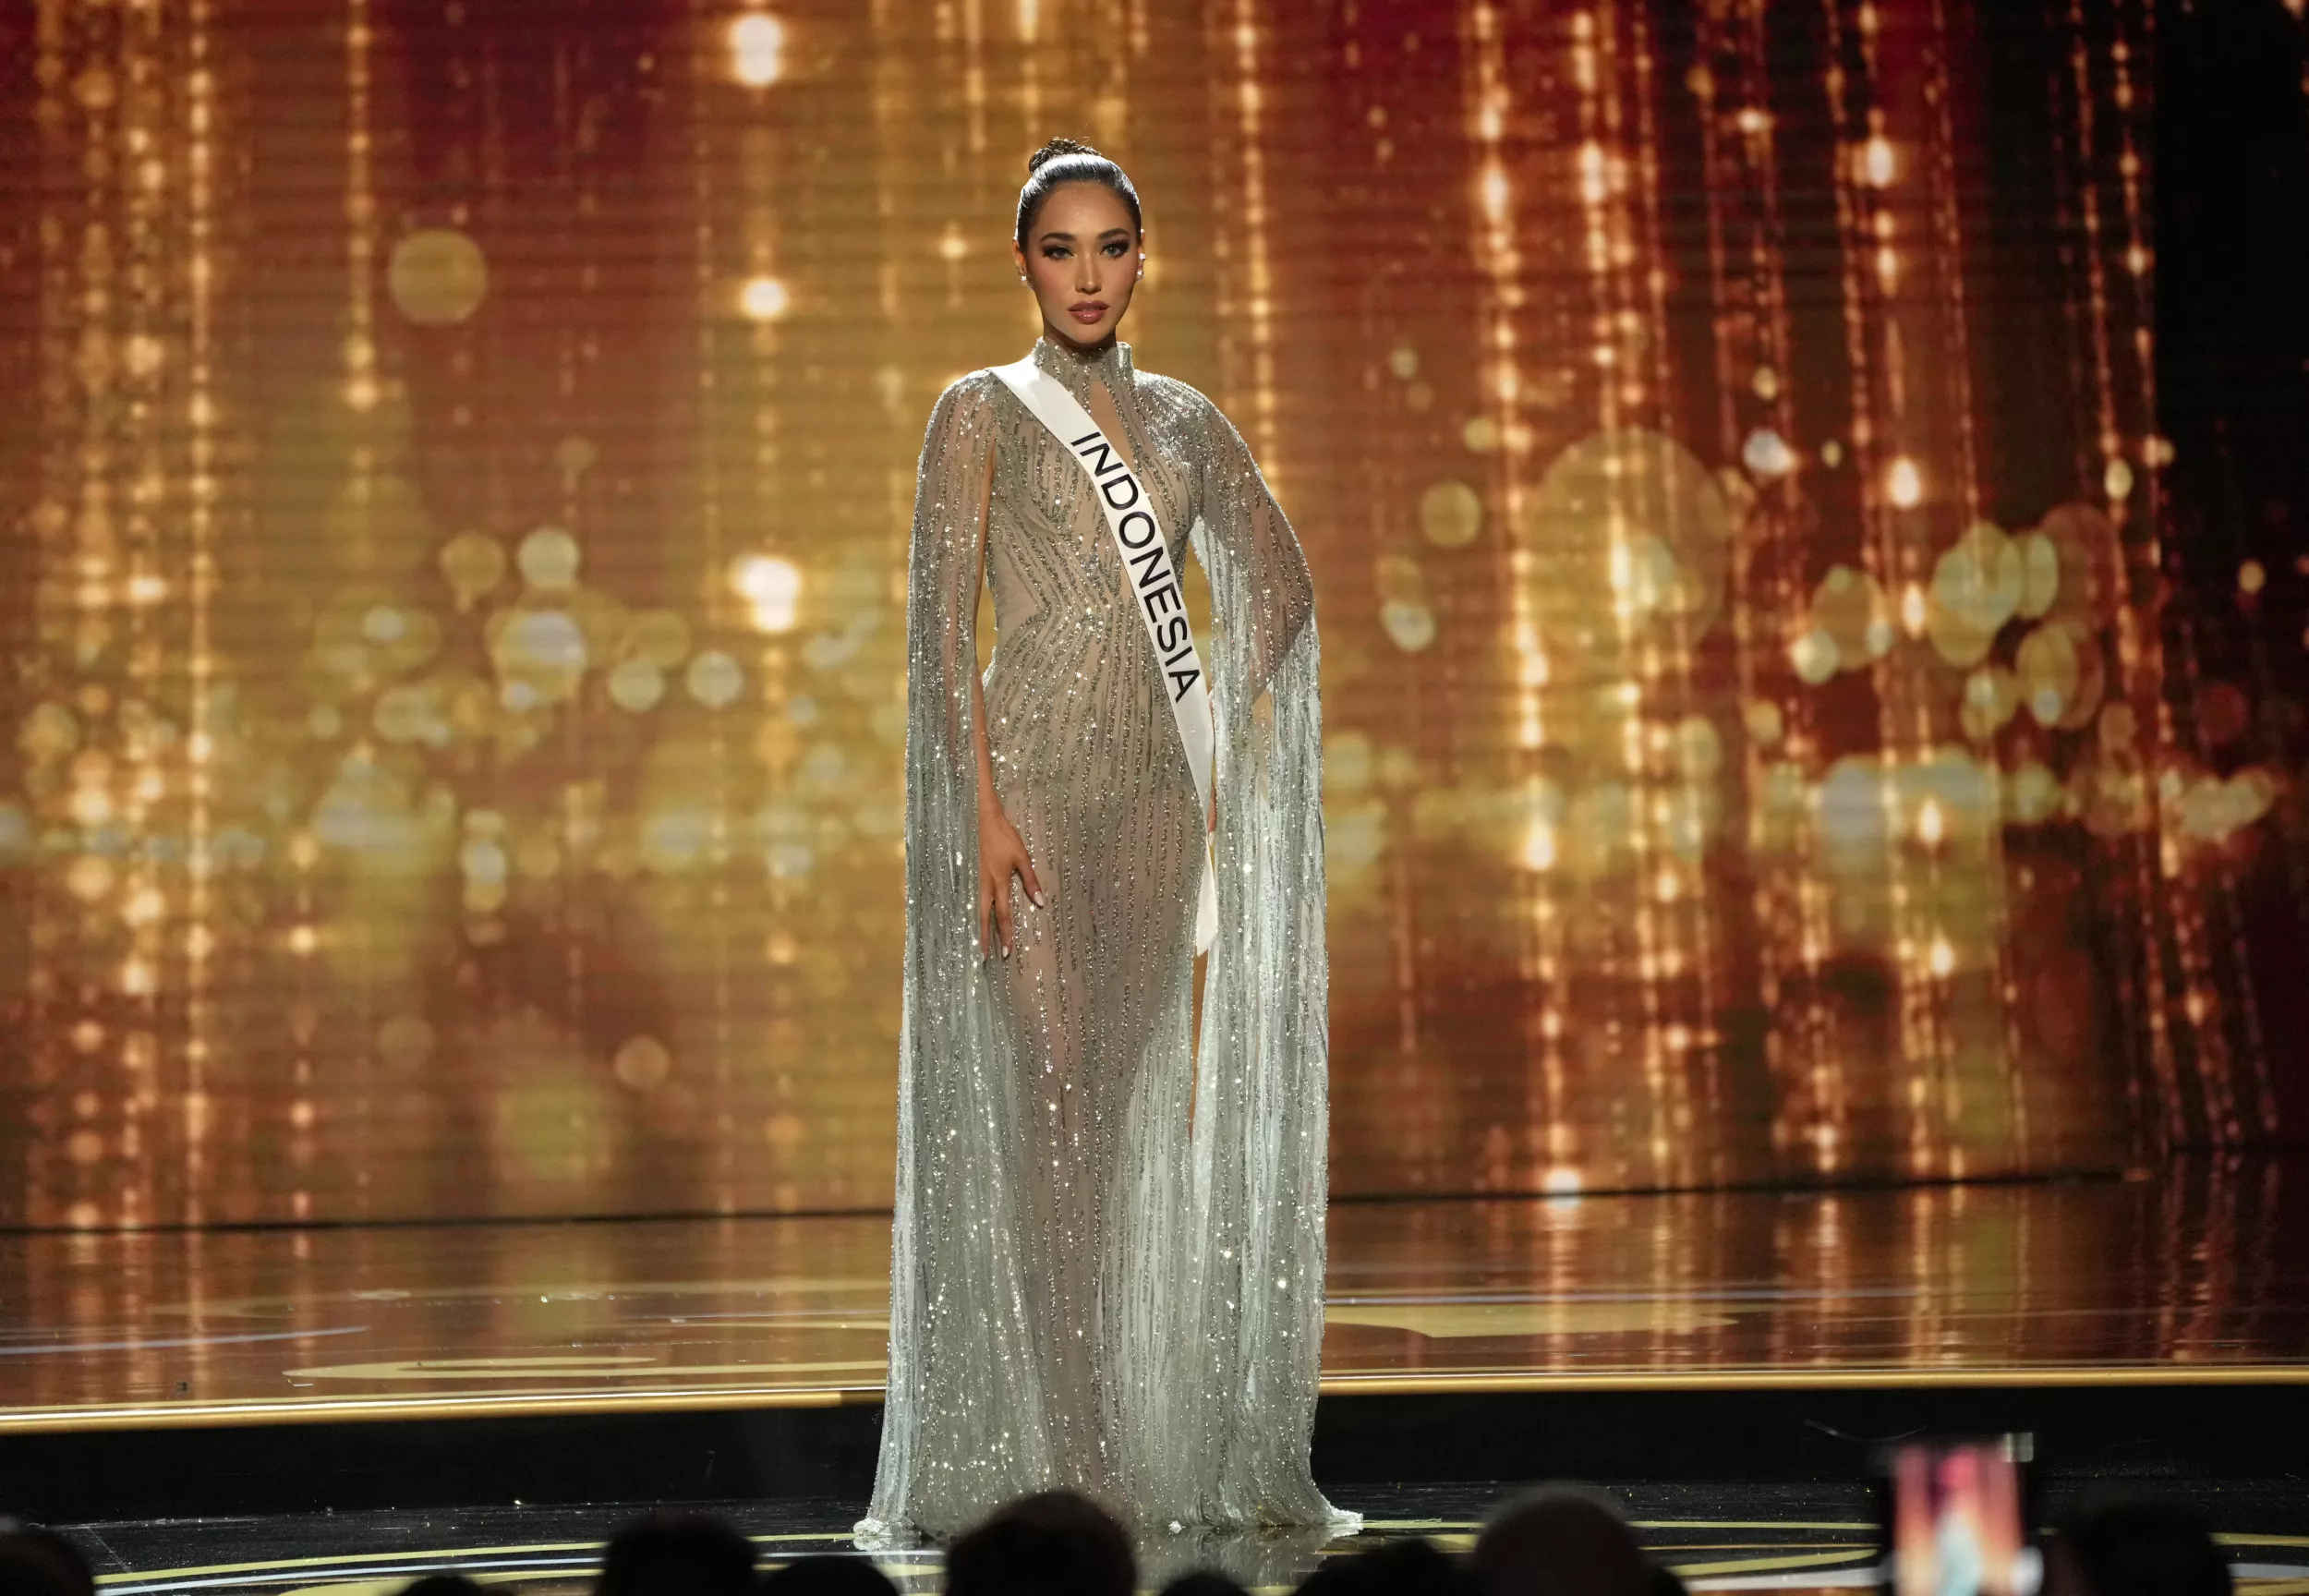 Topless Body Checks at Miss Universe Pageant Spark Complaints pic